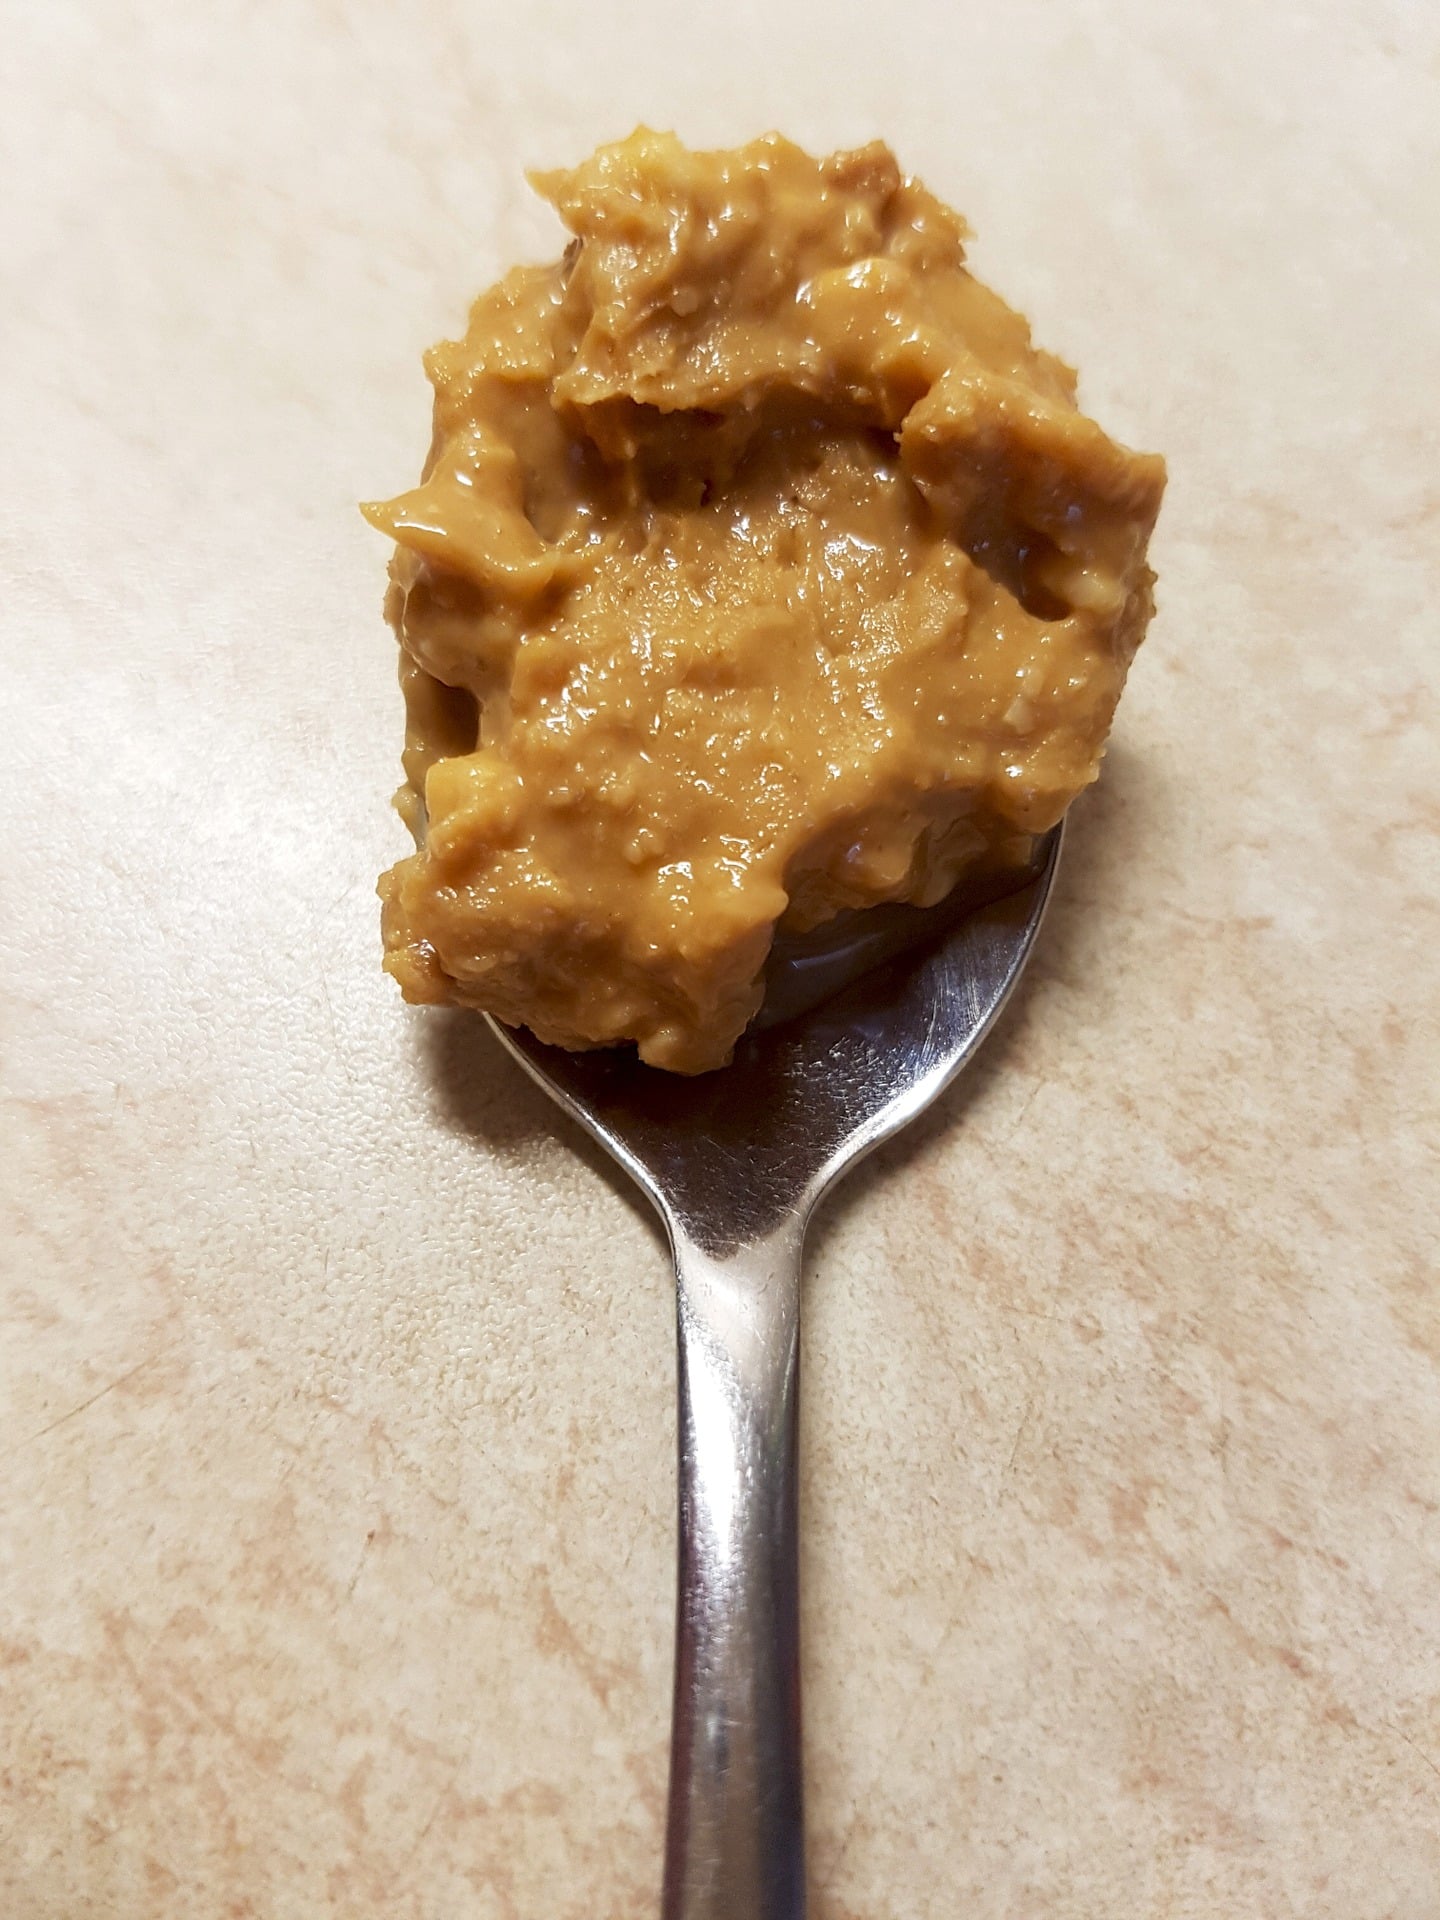 Homemade Peanut Butter Article Image